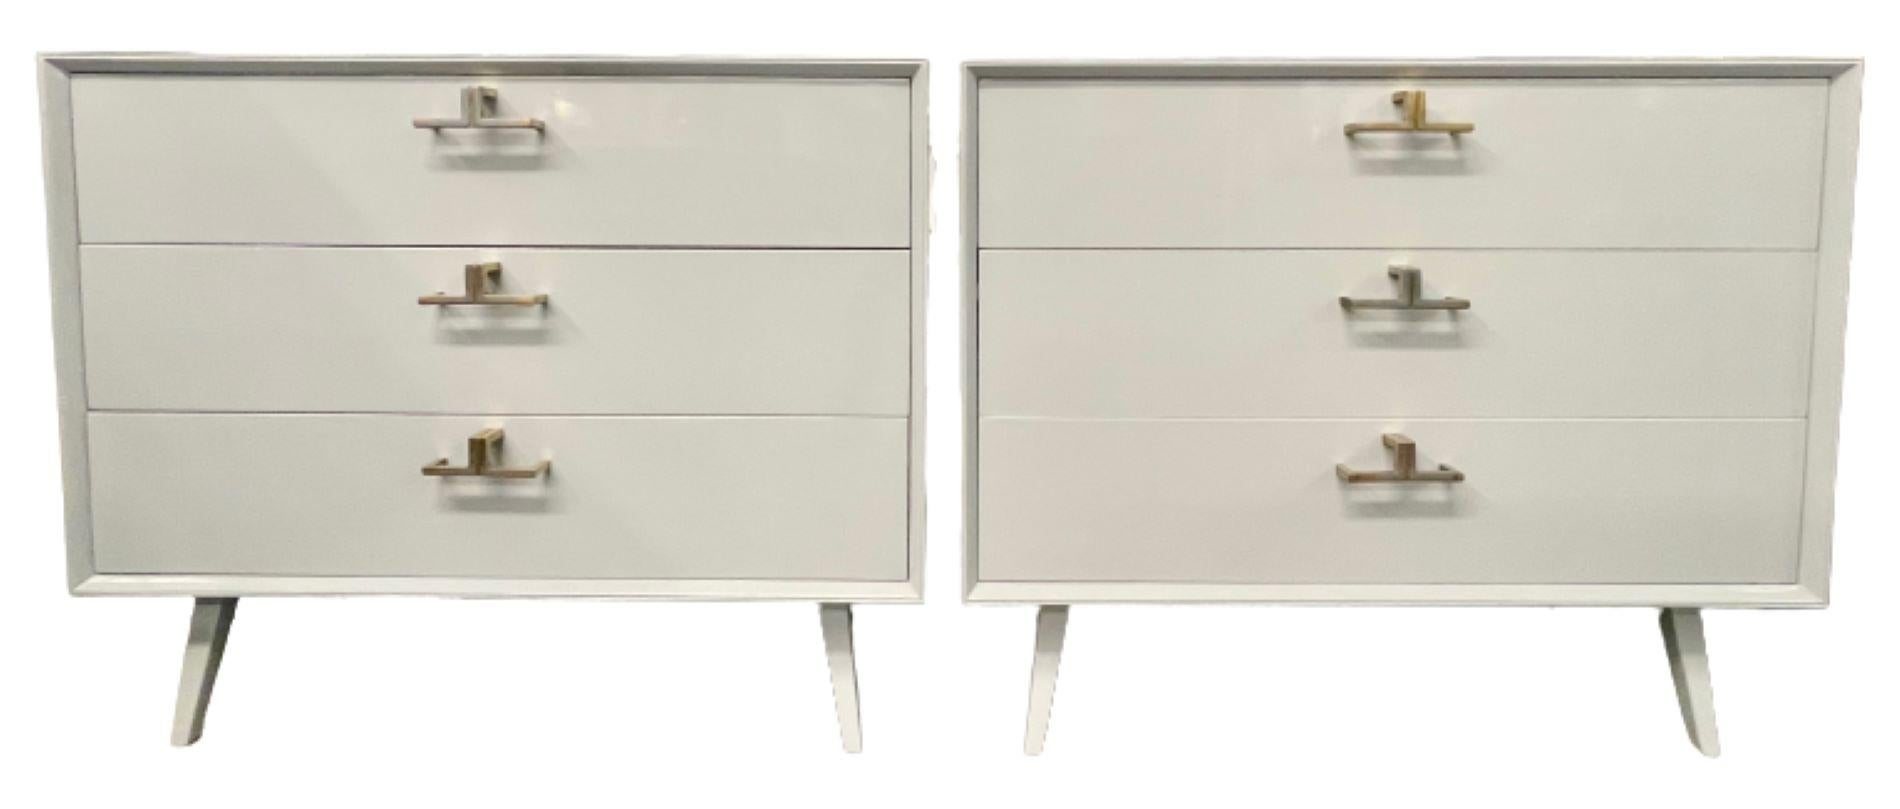 Pair of Mid-Century Modern bachelor chests, commodes, nightstands or dressers in a high gloss grey lacquer. A finely constructed pair of three-drawer commodes, all wood, with brass mounts having a sleek and simply flair. The pair with sprayed legs